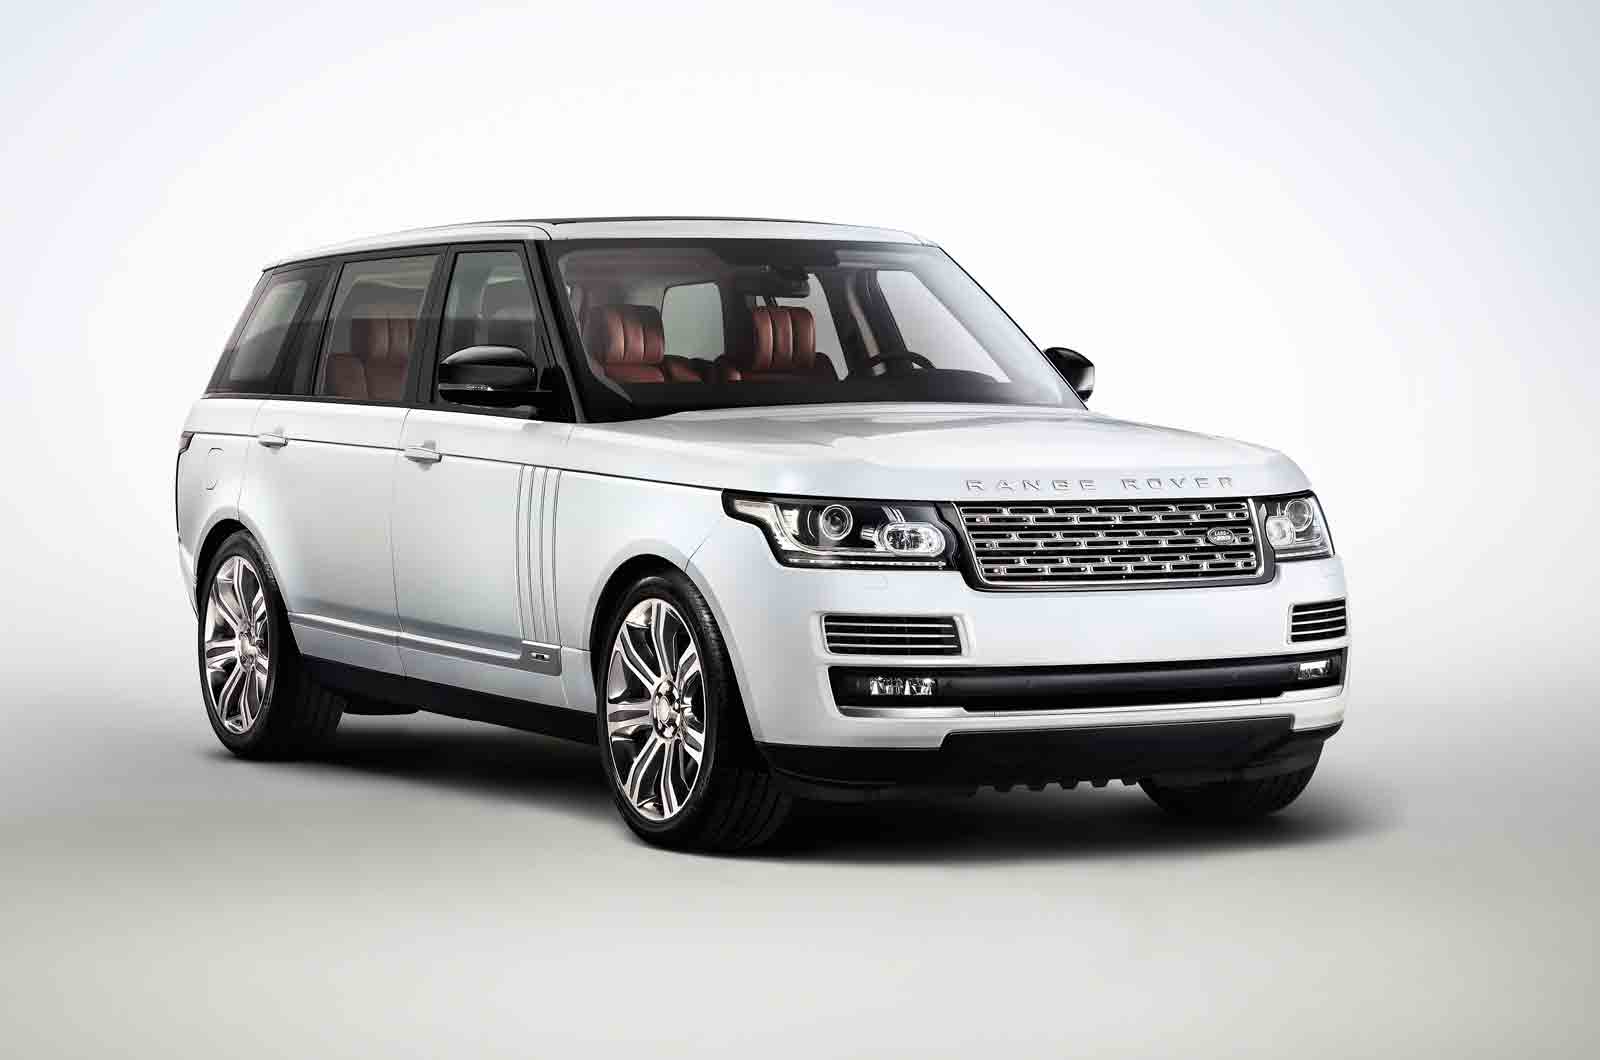 Land Rover Range Rover 20122013 Price Images Mileage Reviews Specs